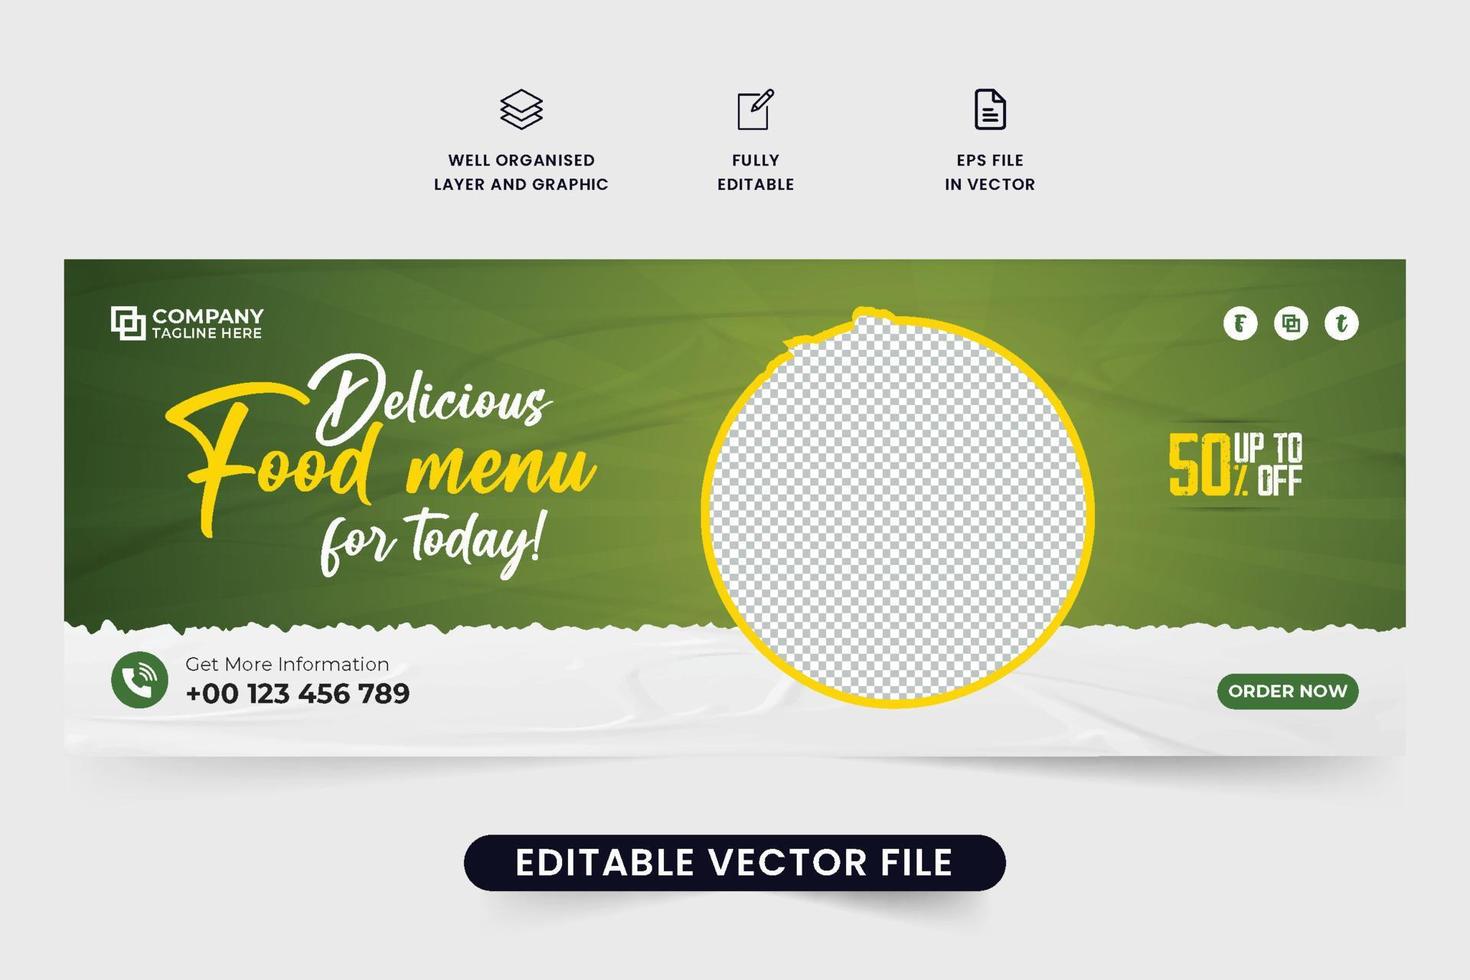 Fresh Healthy food social media cover template vector with green and yellow colors. Restaurant promotion web banner design for digital marketing. Delicious food menu advertisement banner template.